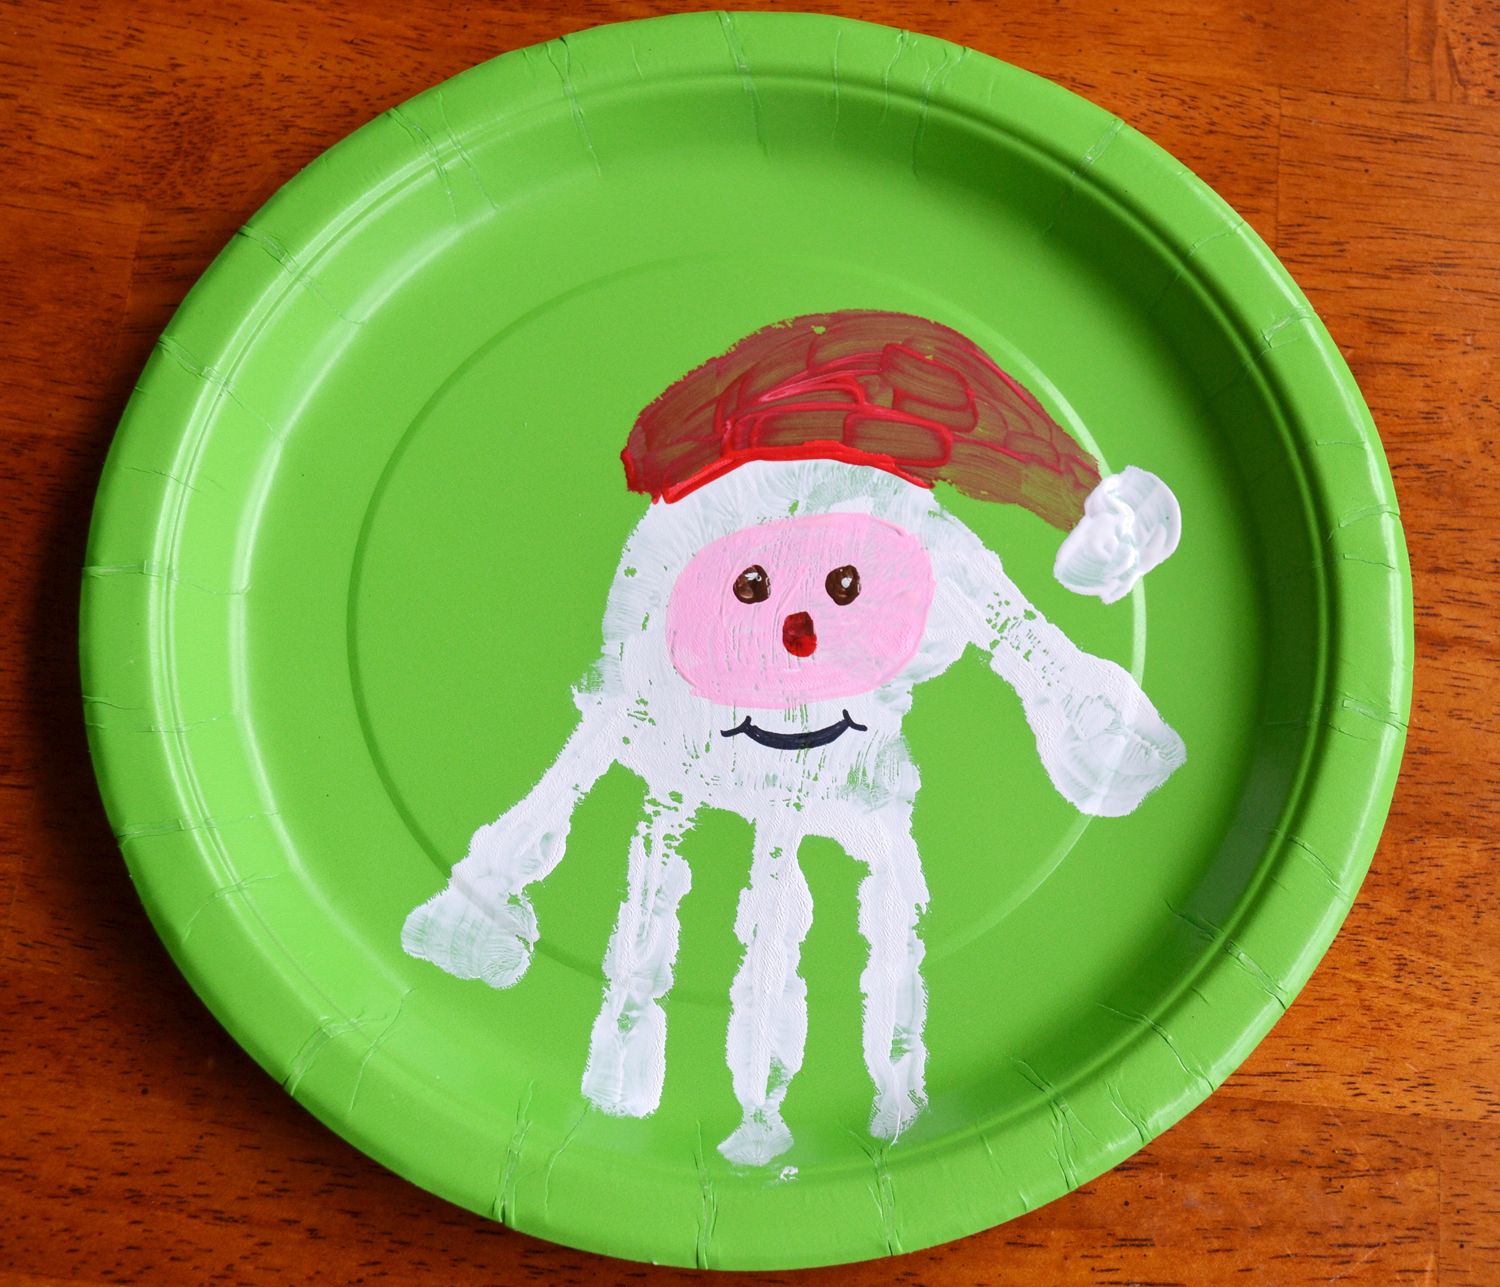 Use your child’s hand to make a handprint on the green plate ... -   Handprint plates ideas